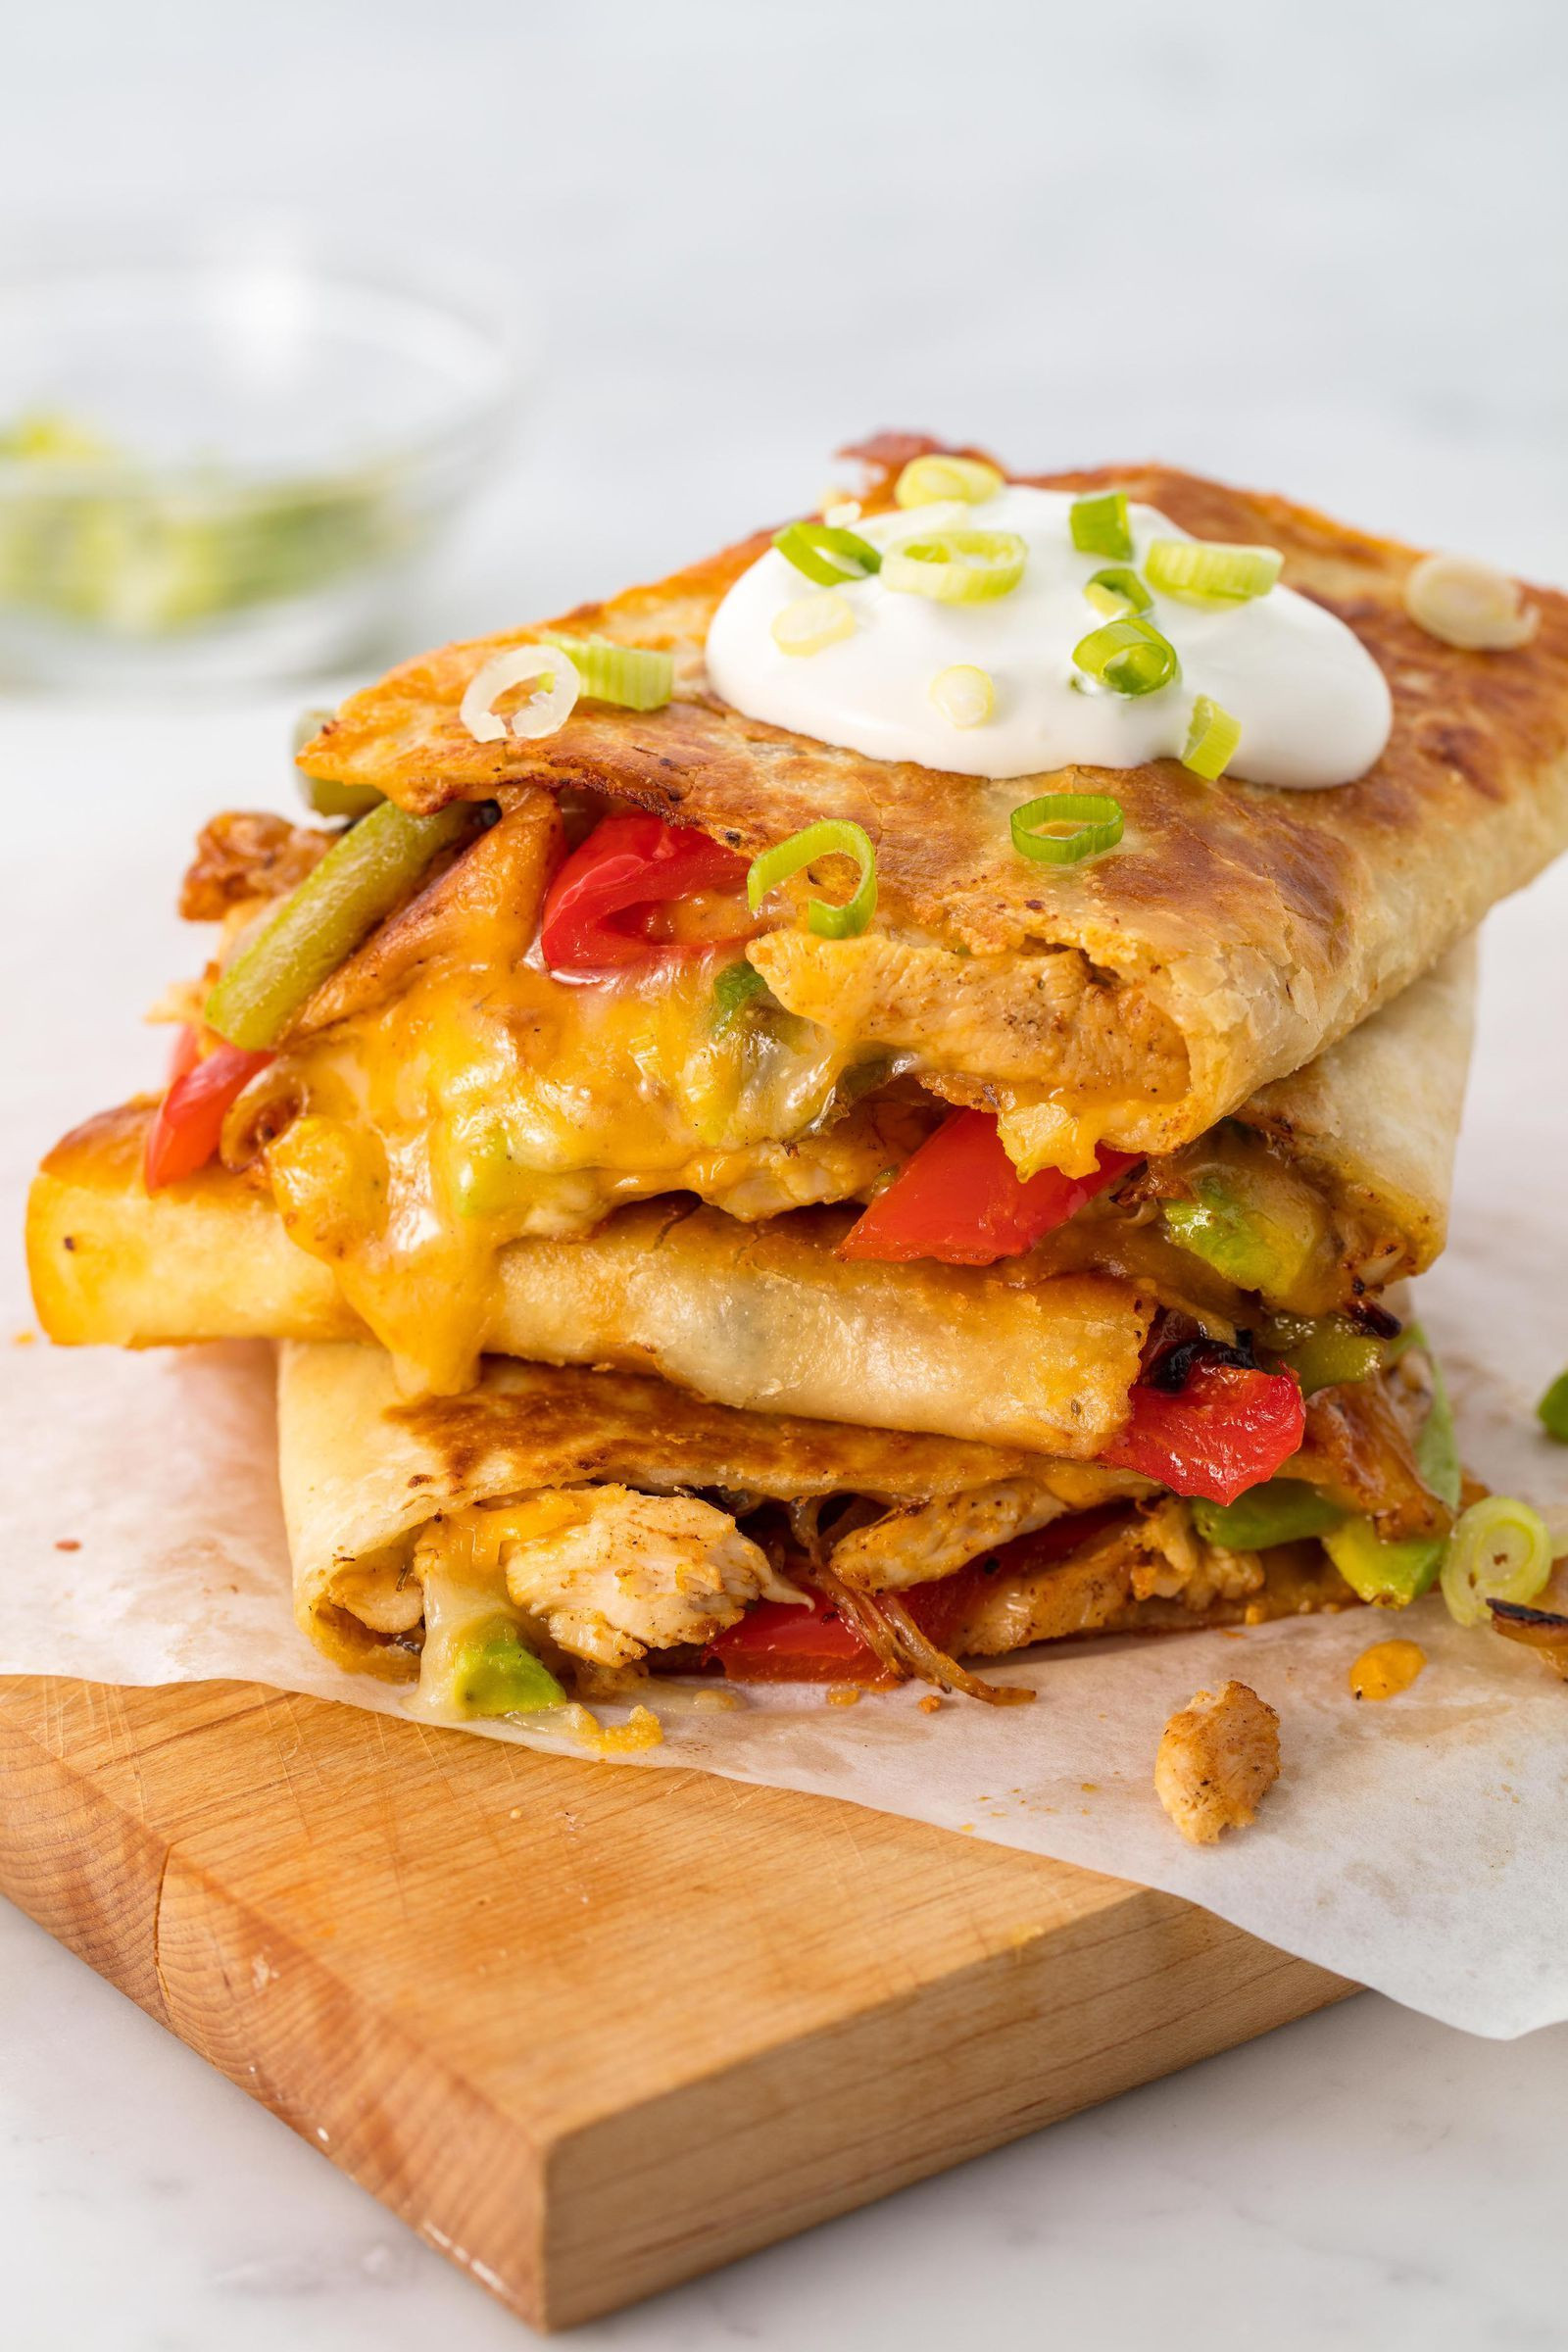 Mexican Quesadillas Recipes
 The Most Creative Quesadilla Recipes Ever From Sweet to